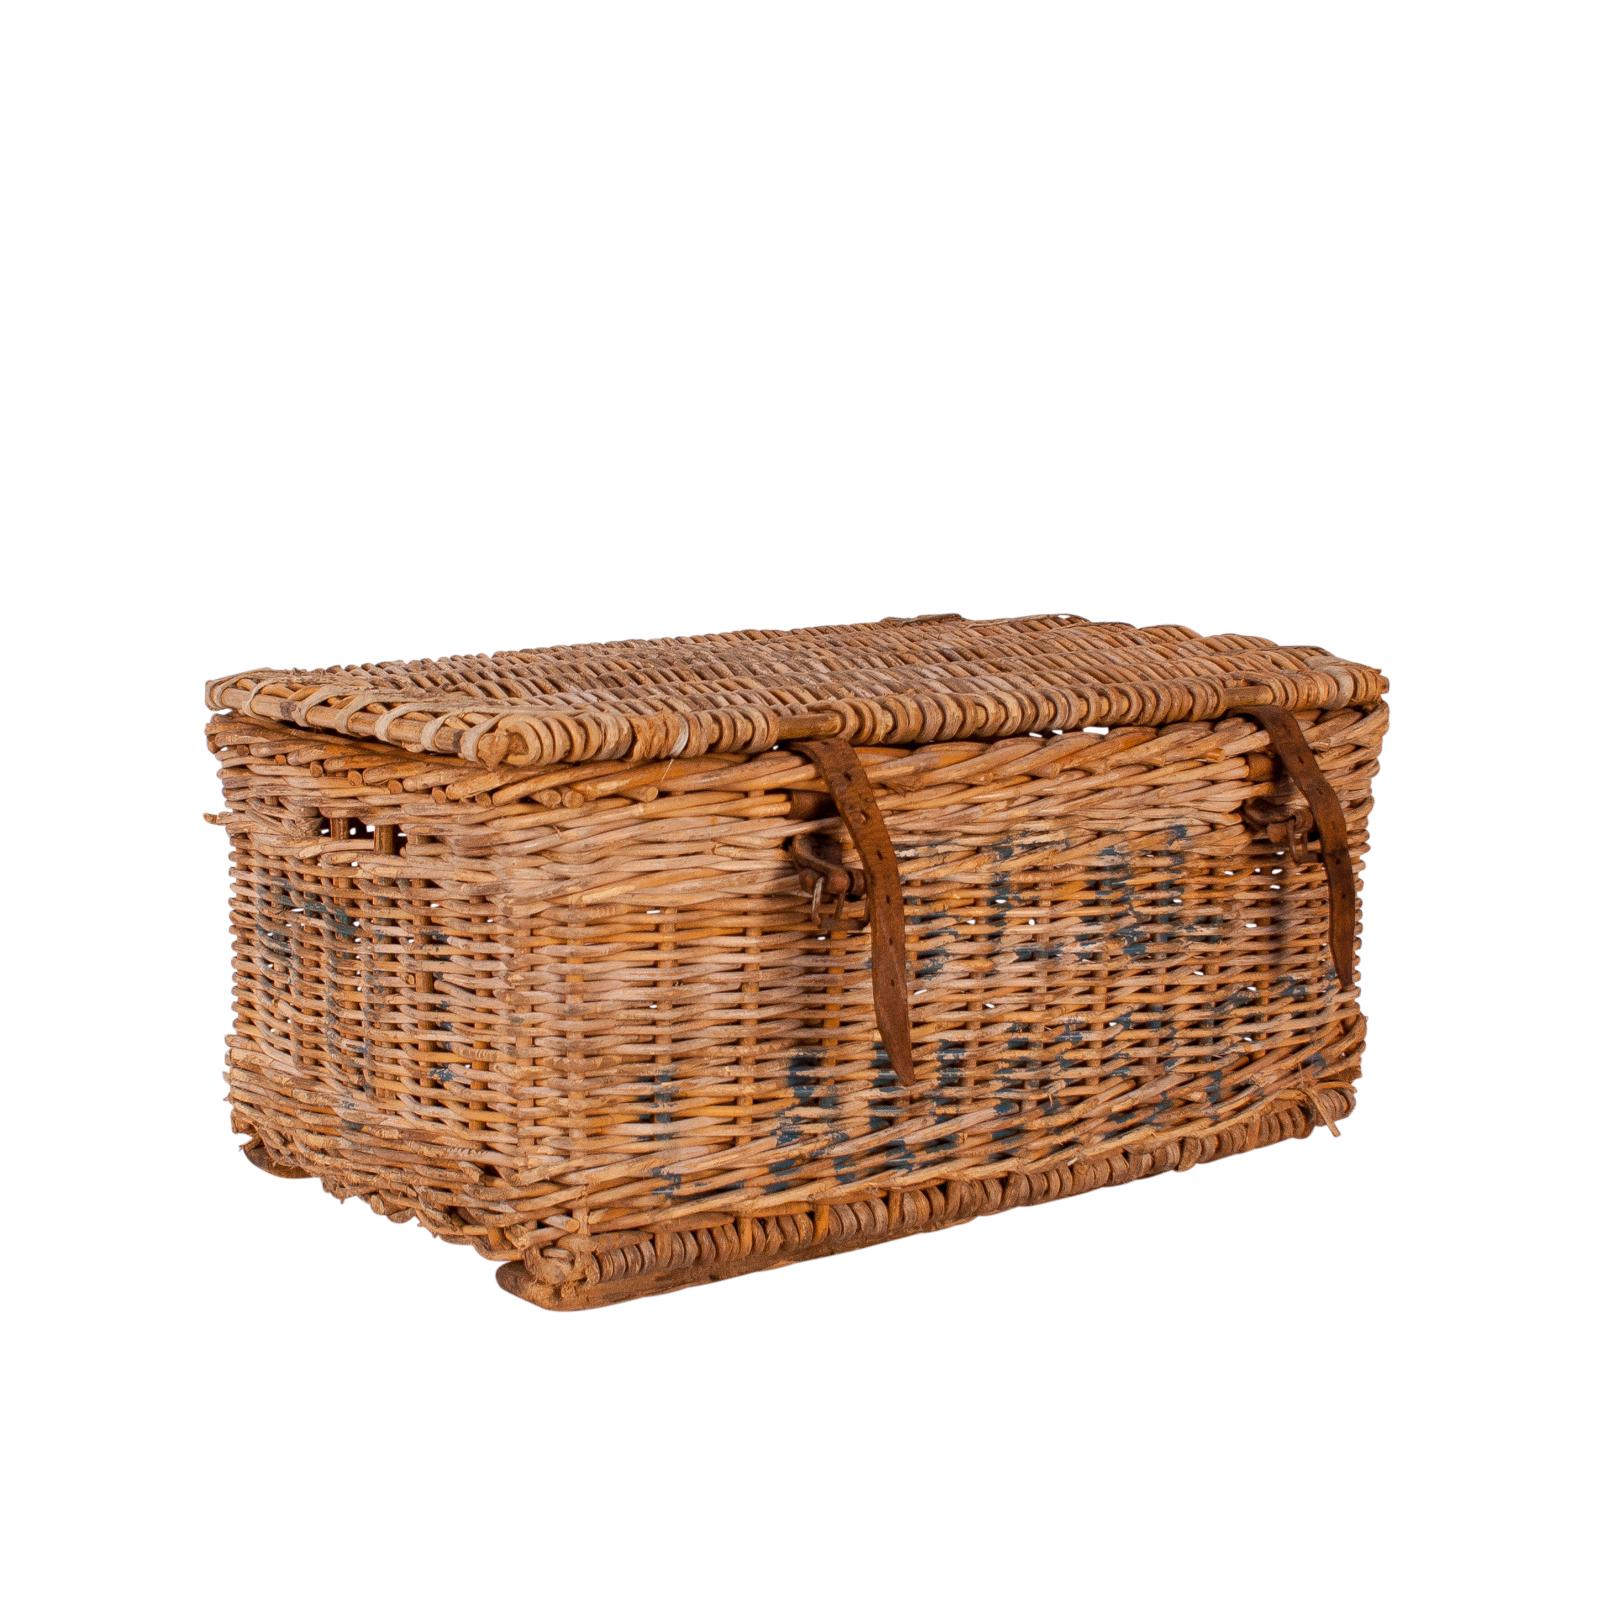 An early 20th century English wicker basket with leather straps, circa 1900.